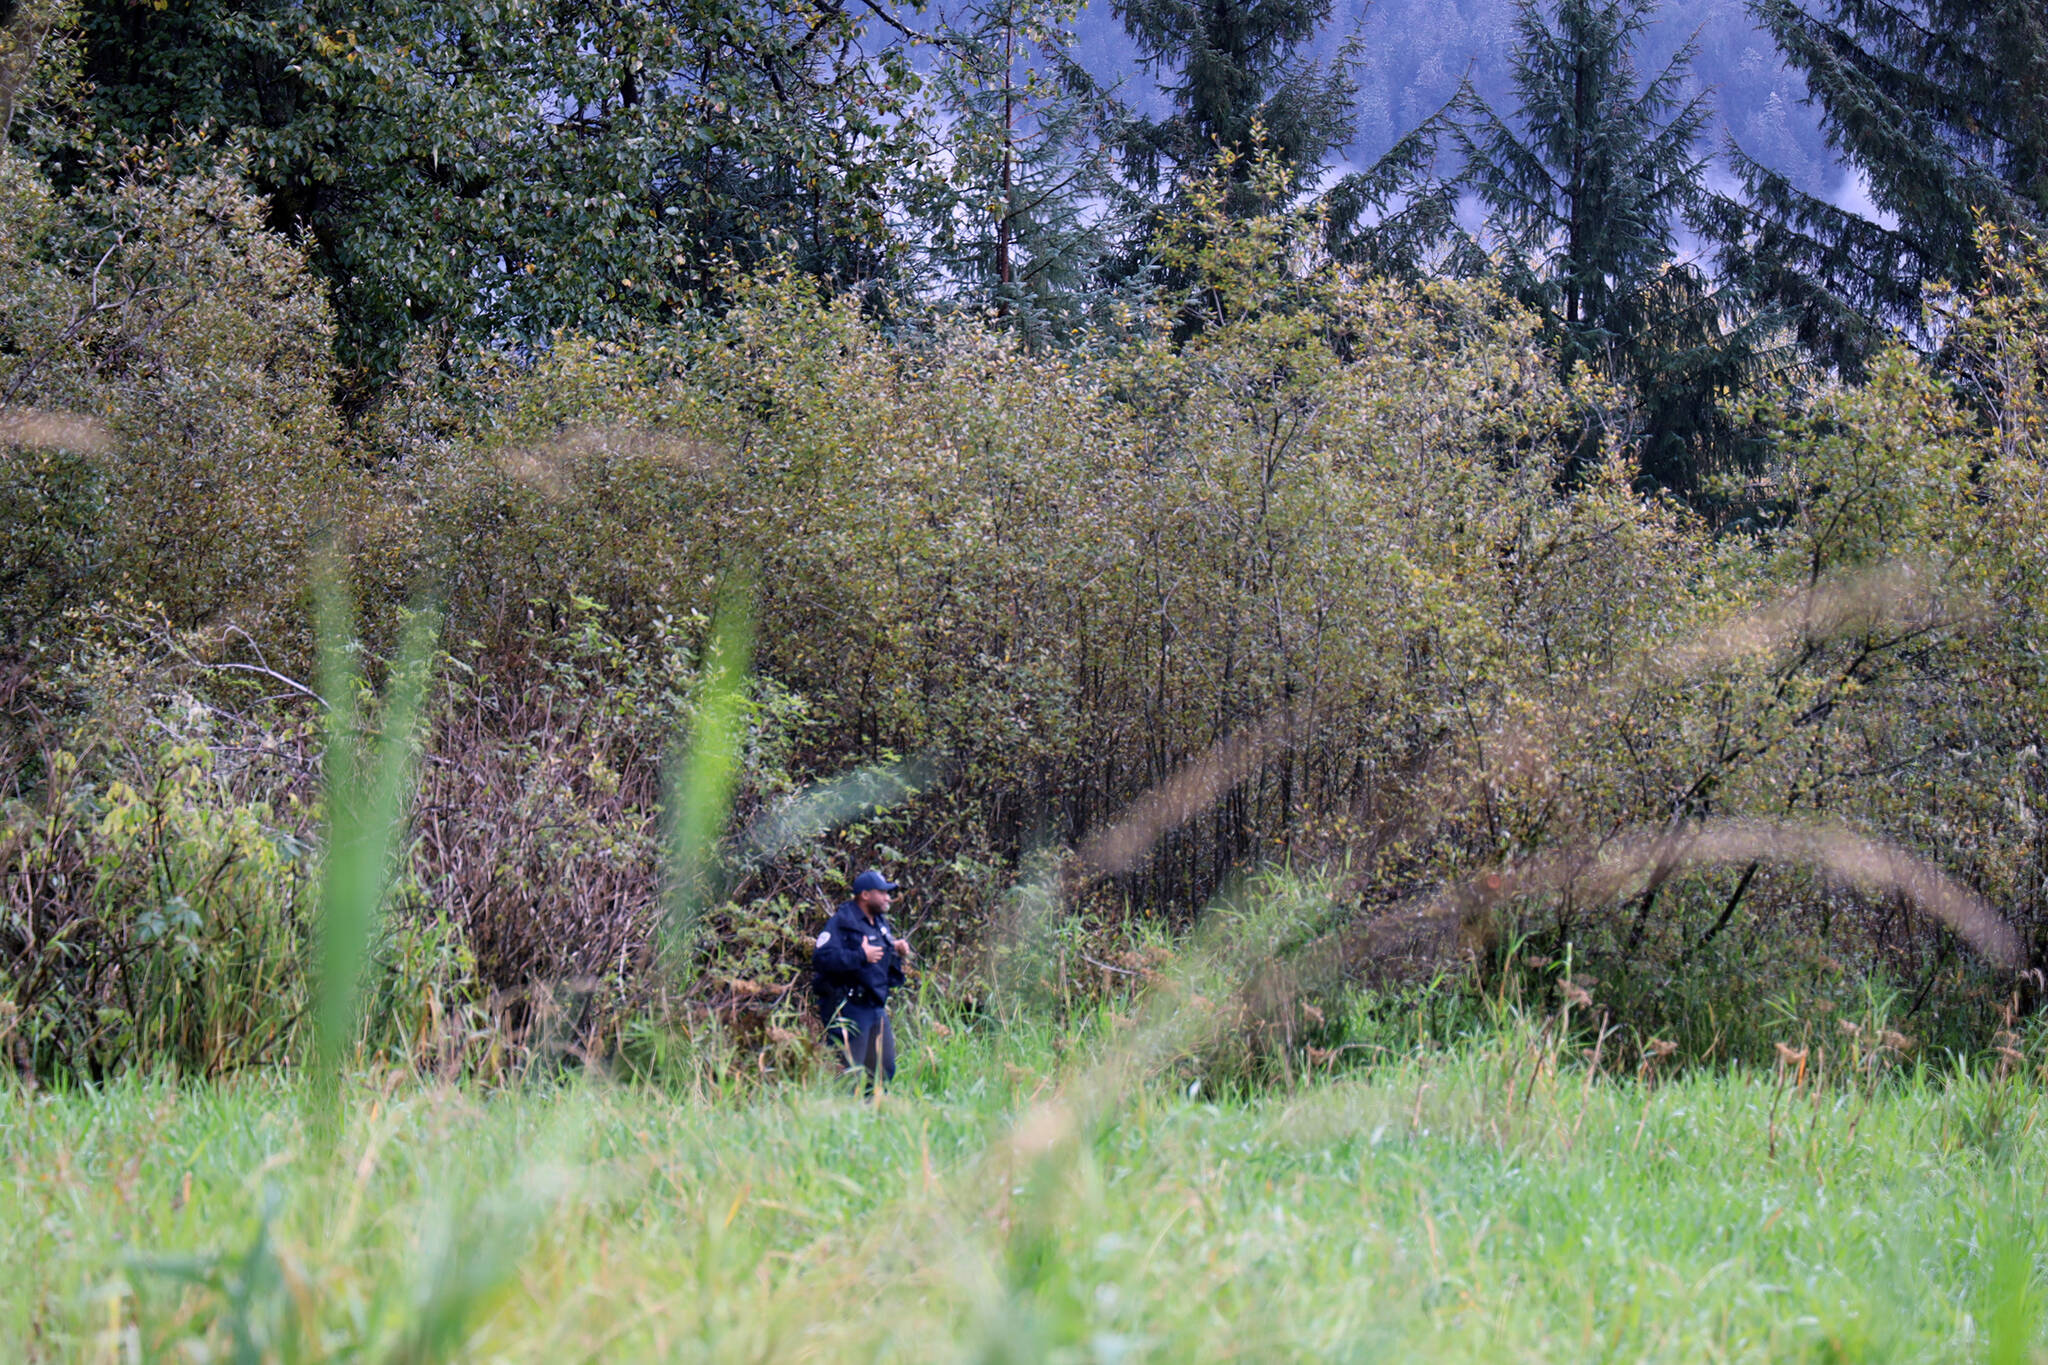 Clarise Larson / Juneau Empire
Officer Taylor Davis stands in a wooded area near what police described as an active crime scene. Davis and another officer asked for people to stay away from the area until further notice. No further details were offered from the officers as of 11 a.m.